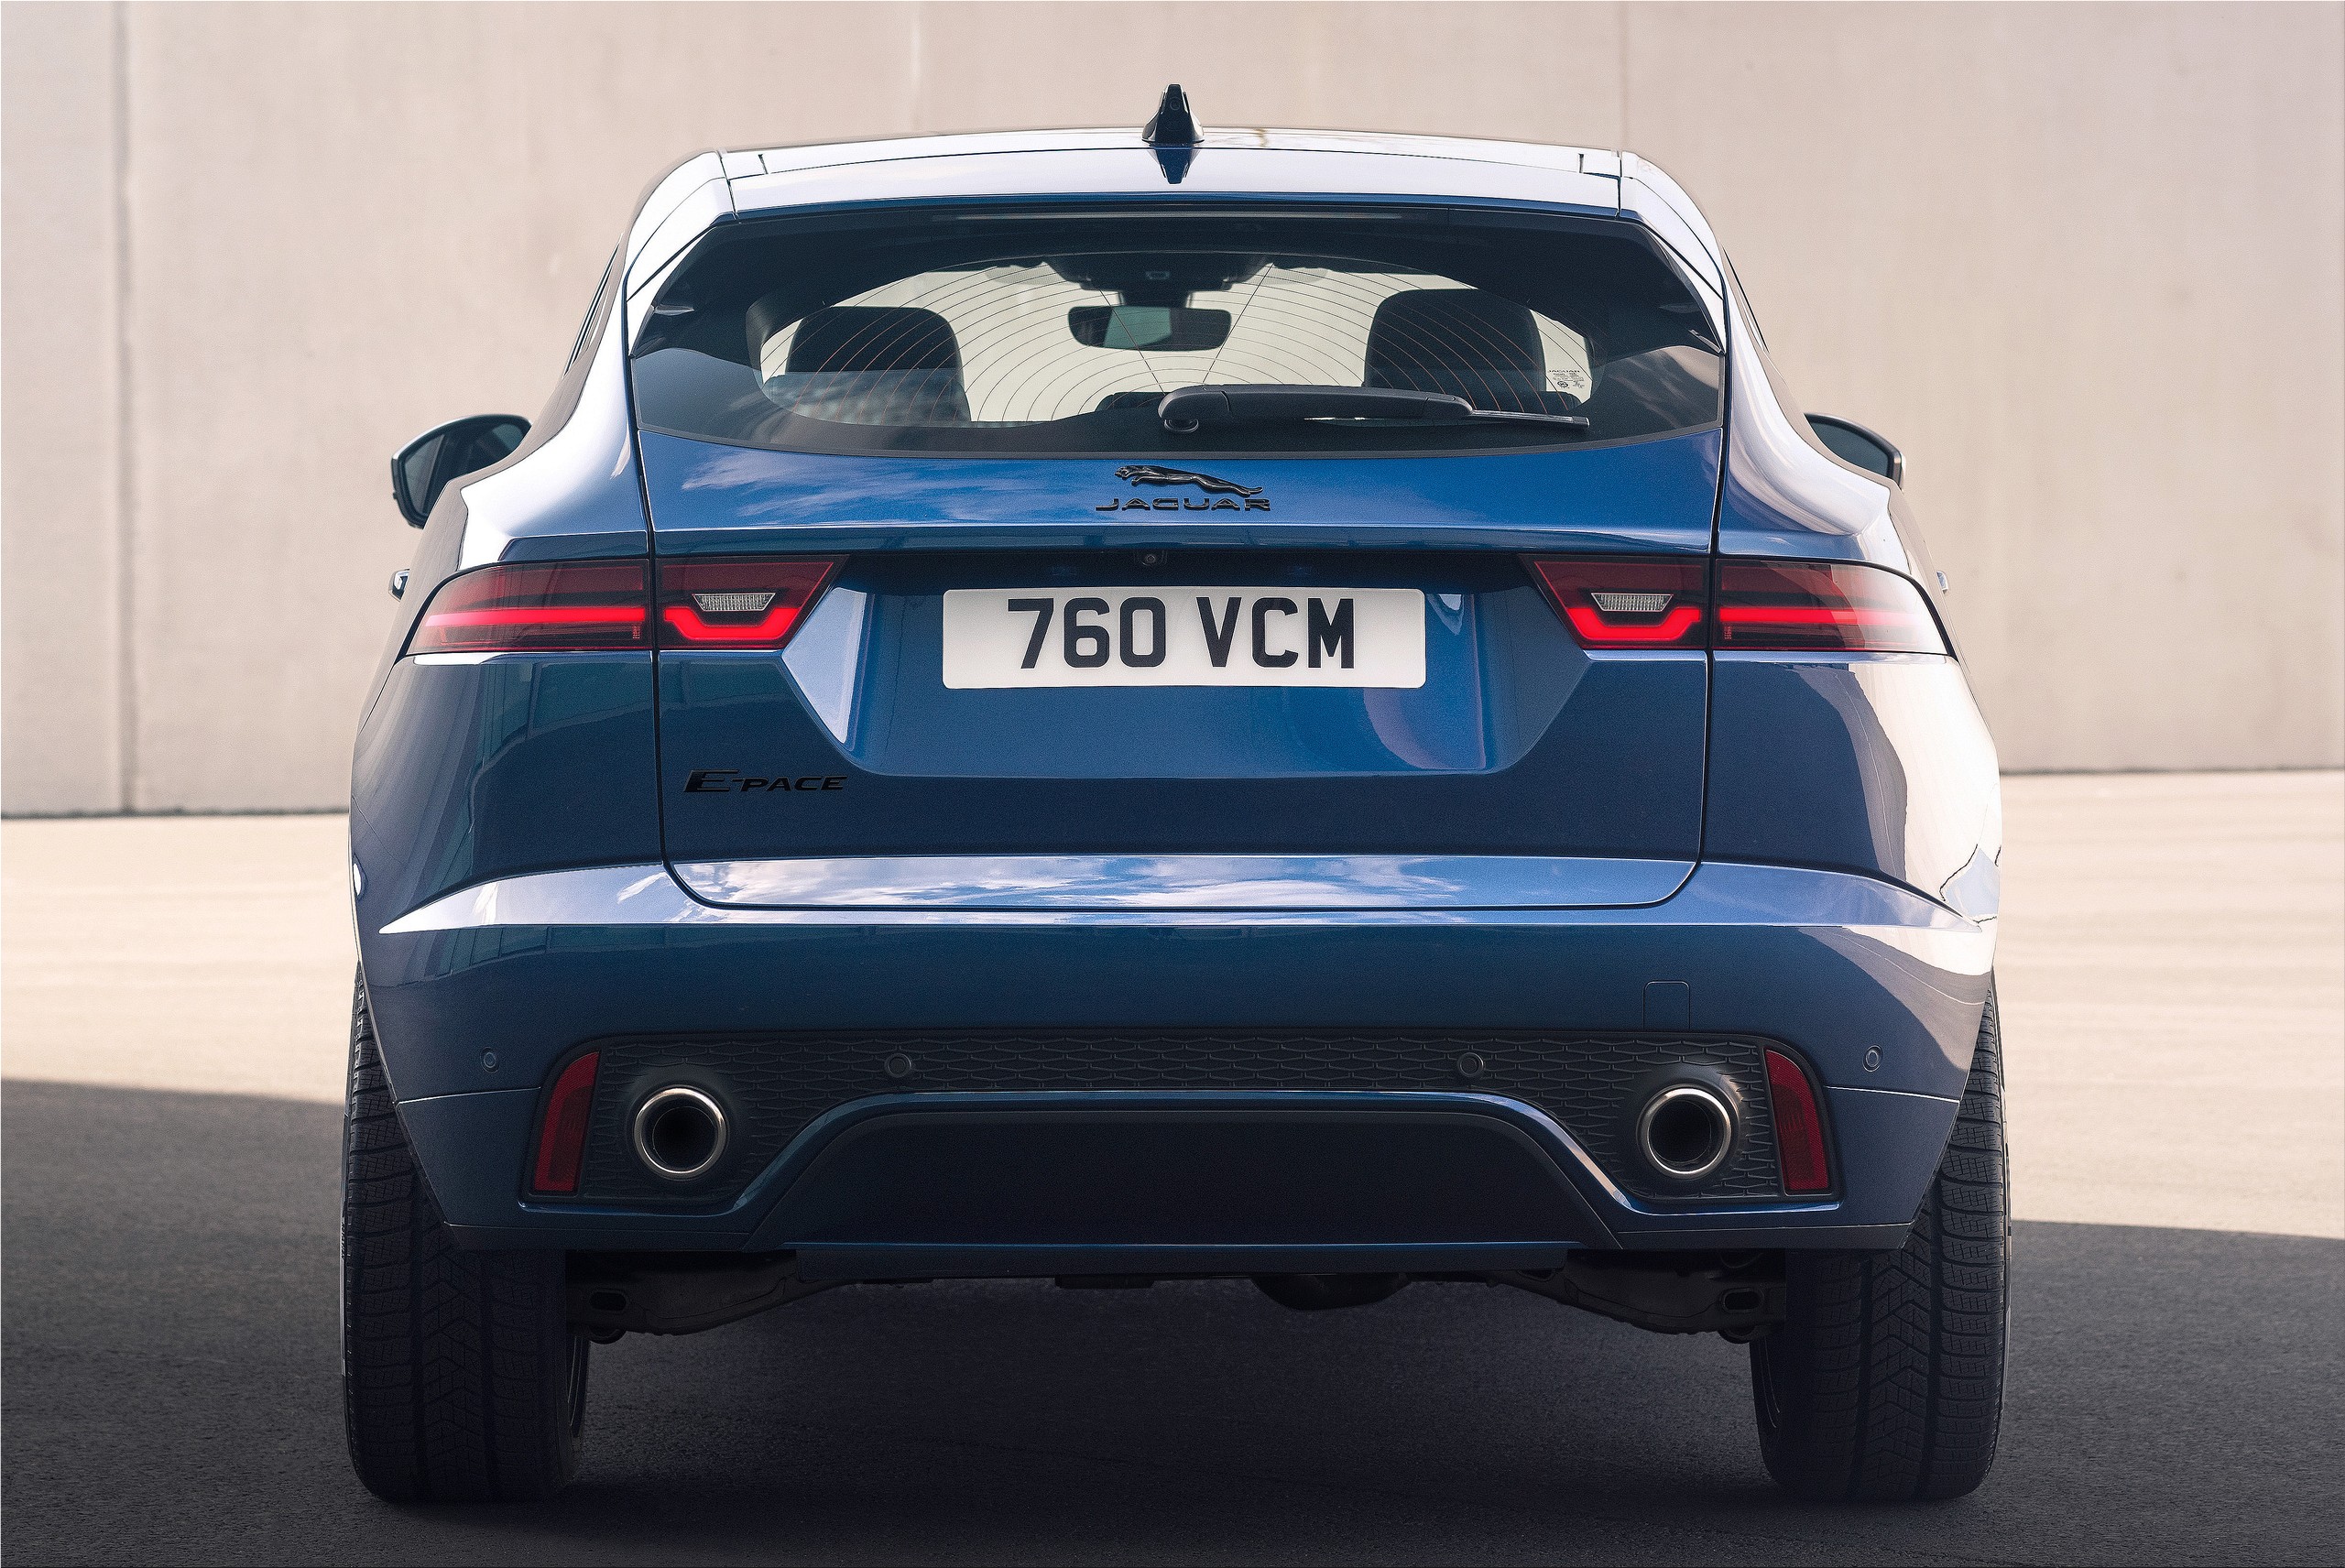 The New Jaguar E Pace With A Restyled Exterior And A Phev Powertrain Spare Wheel